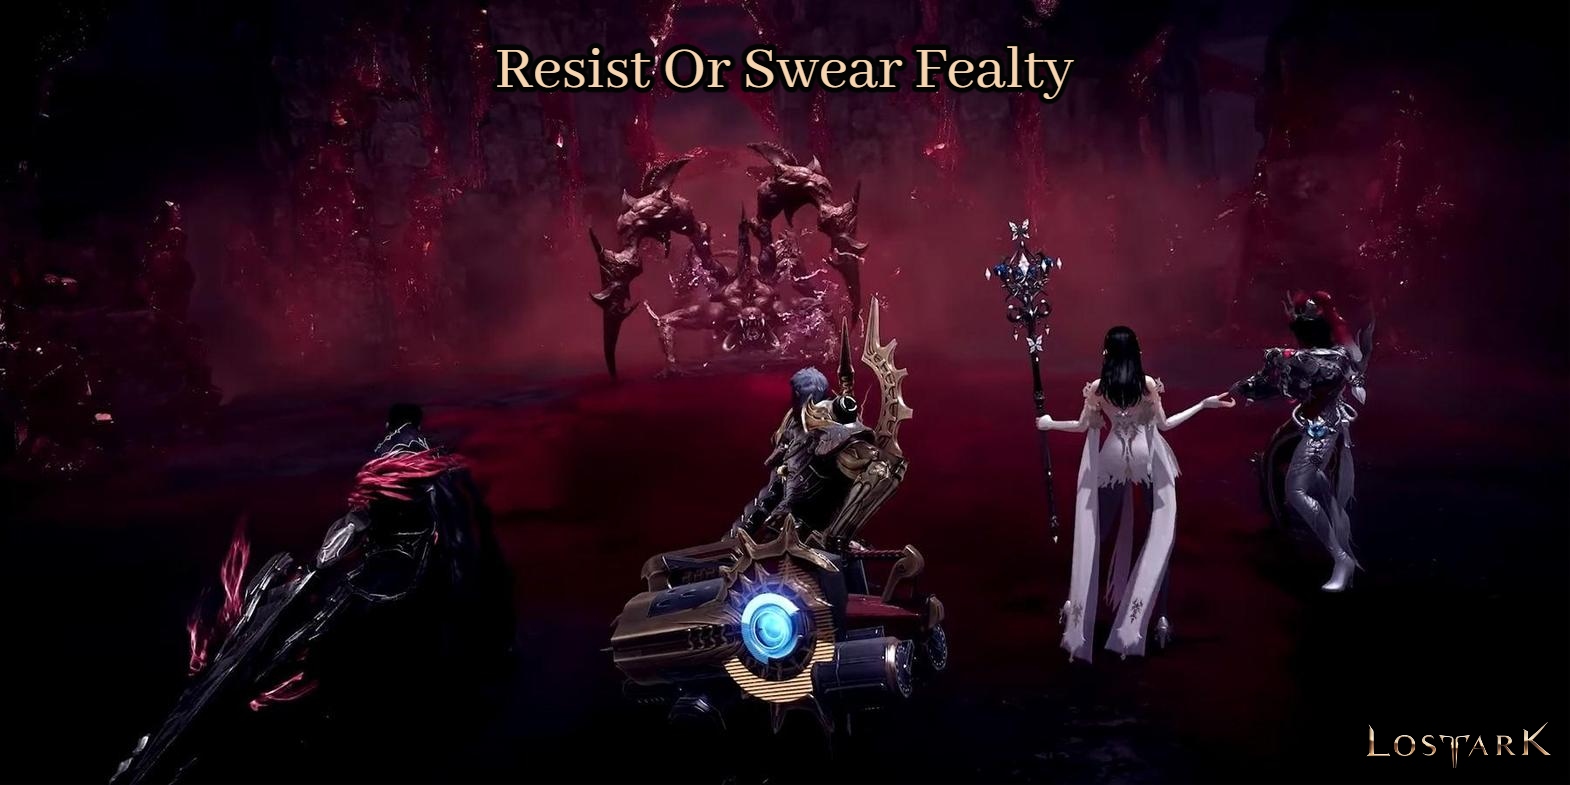 You are currently viewing Lost Ark Resist Or Swear Fealty